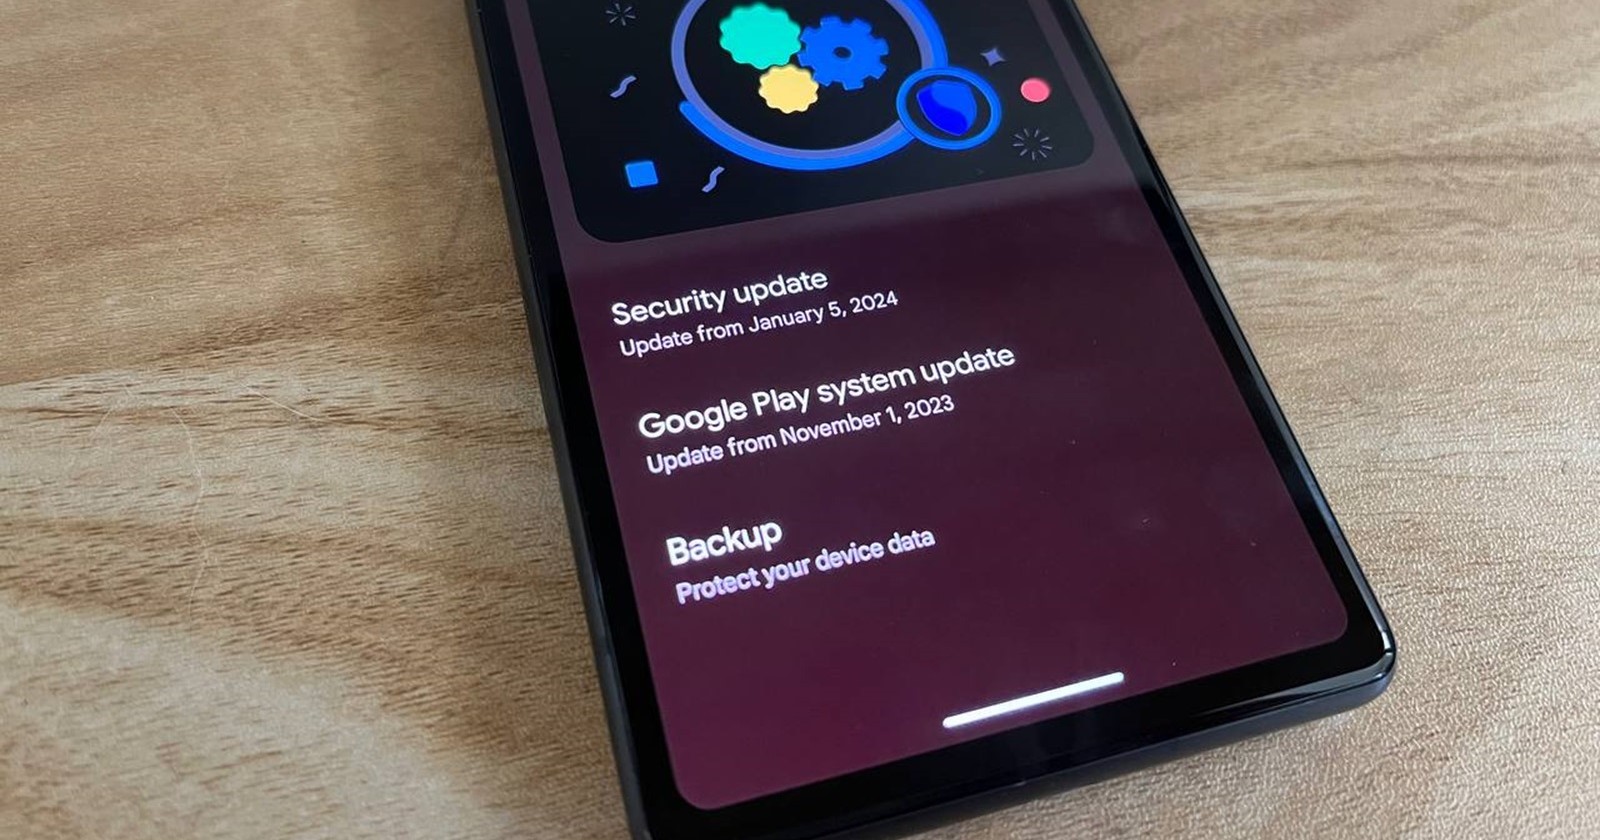 Some Google Pixel users report issues accessing internal storage after January Play System update